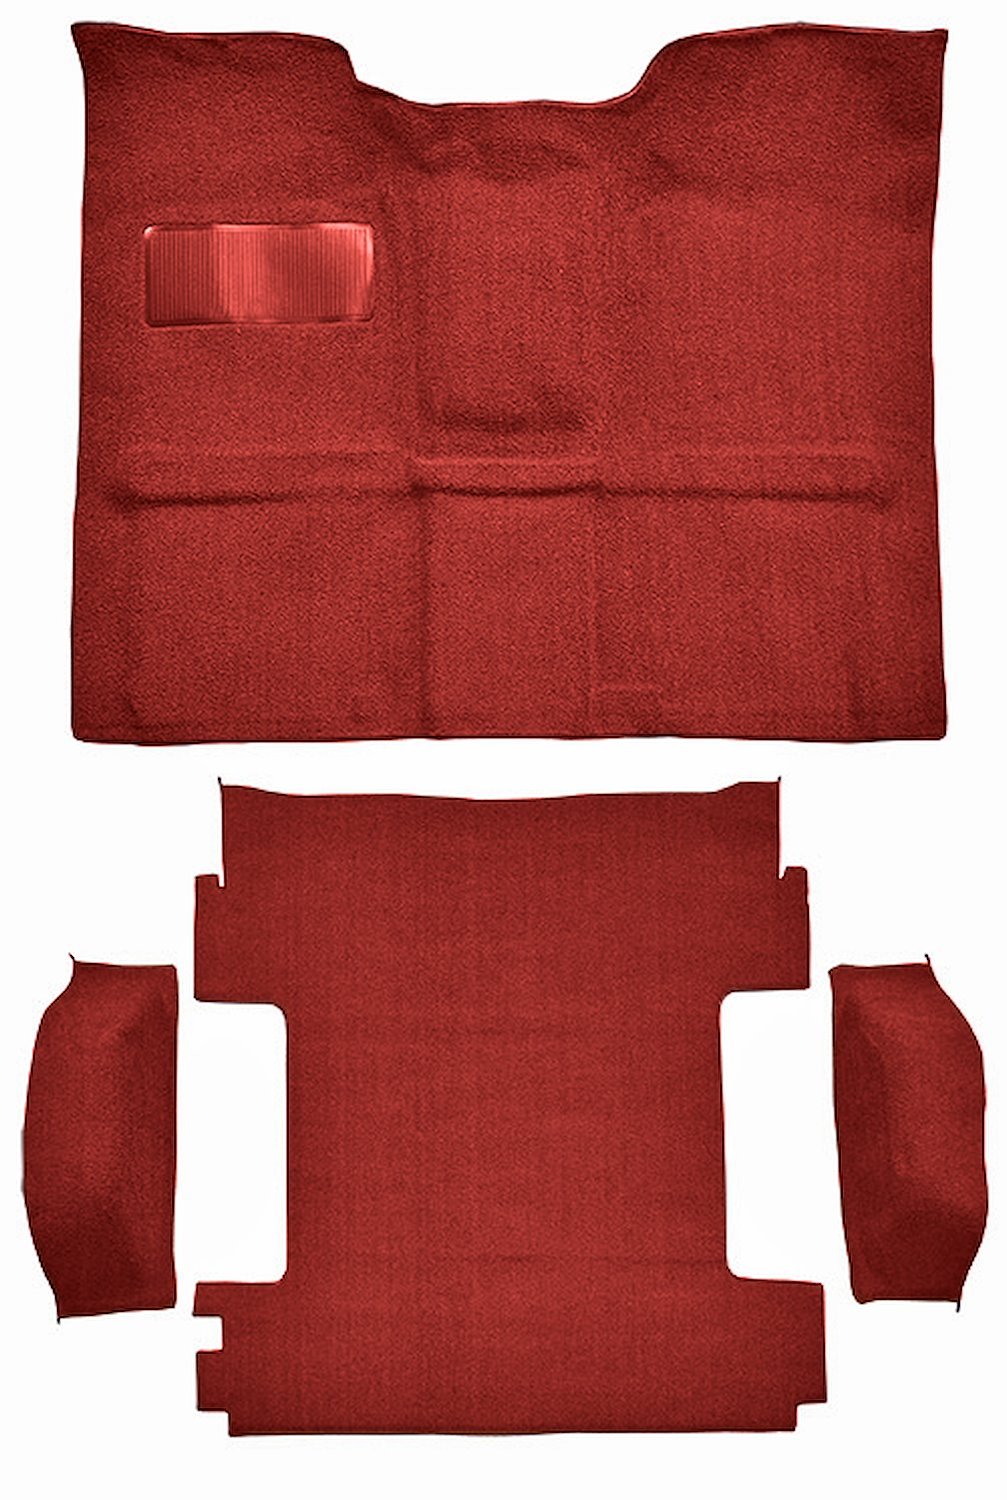 Molded Loop Carpet for 1969-1972 Chevrolet Blazer, 1970-1972 GMC Jimmy [Mass Backing, 4-Piece, Red]